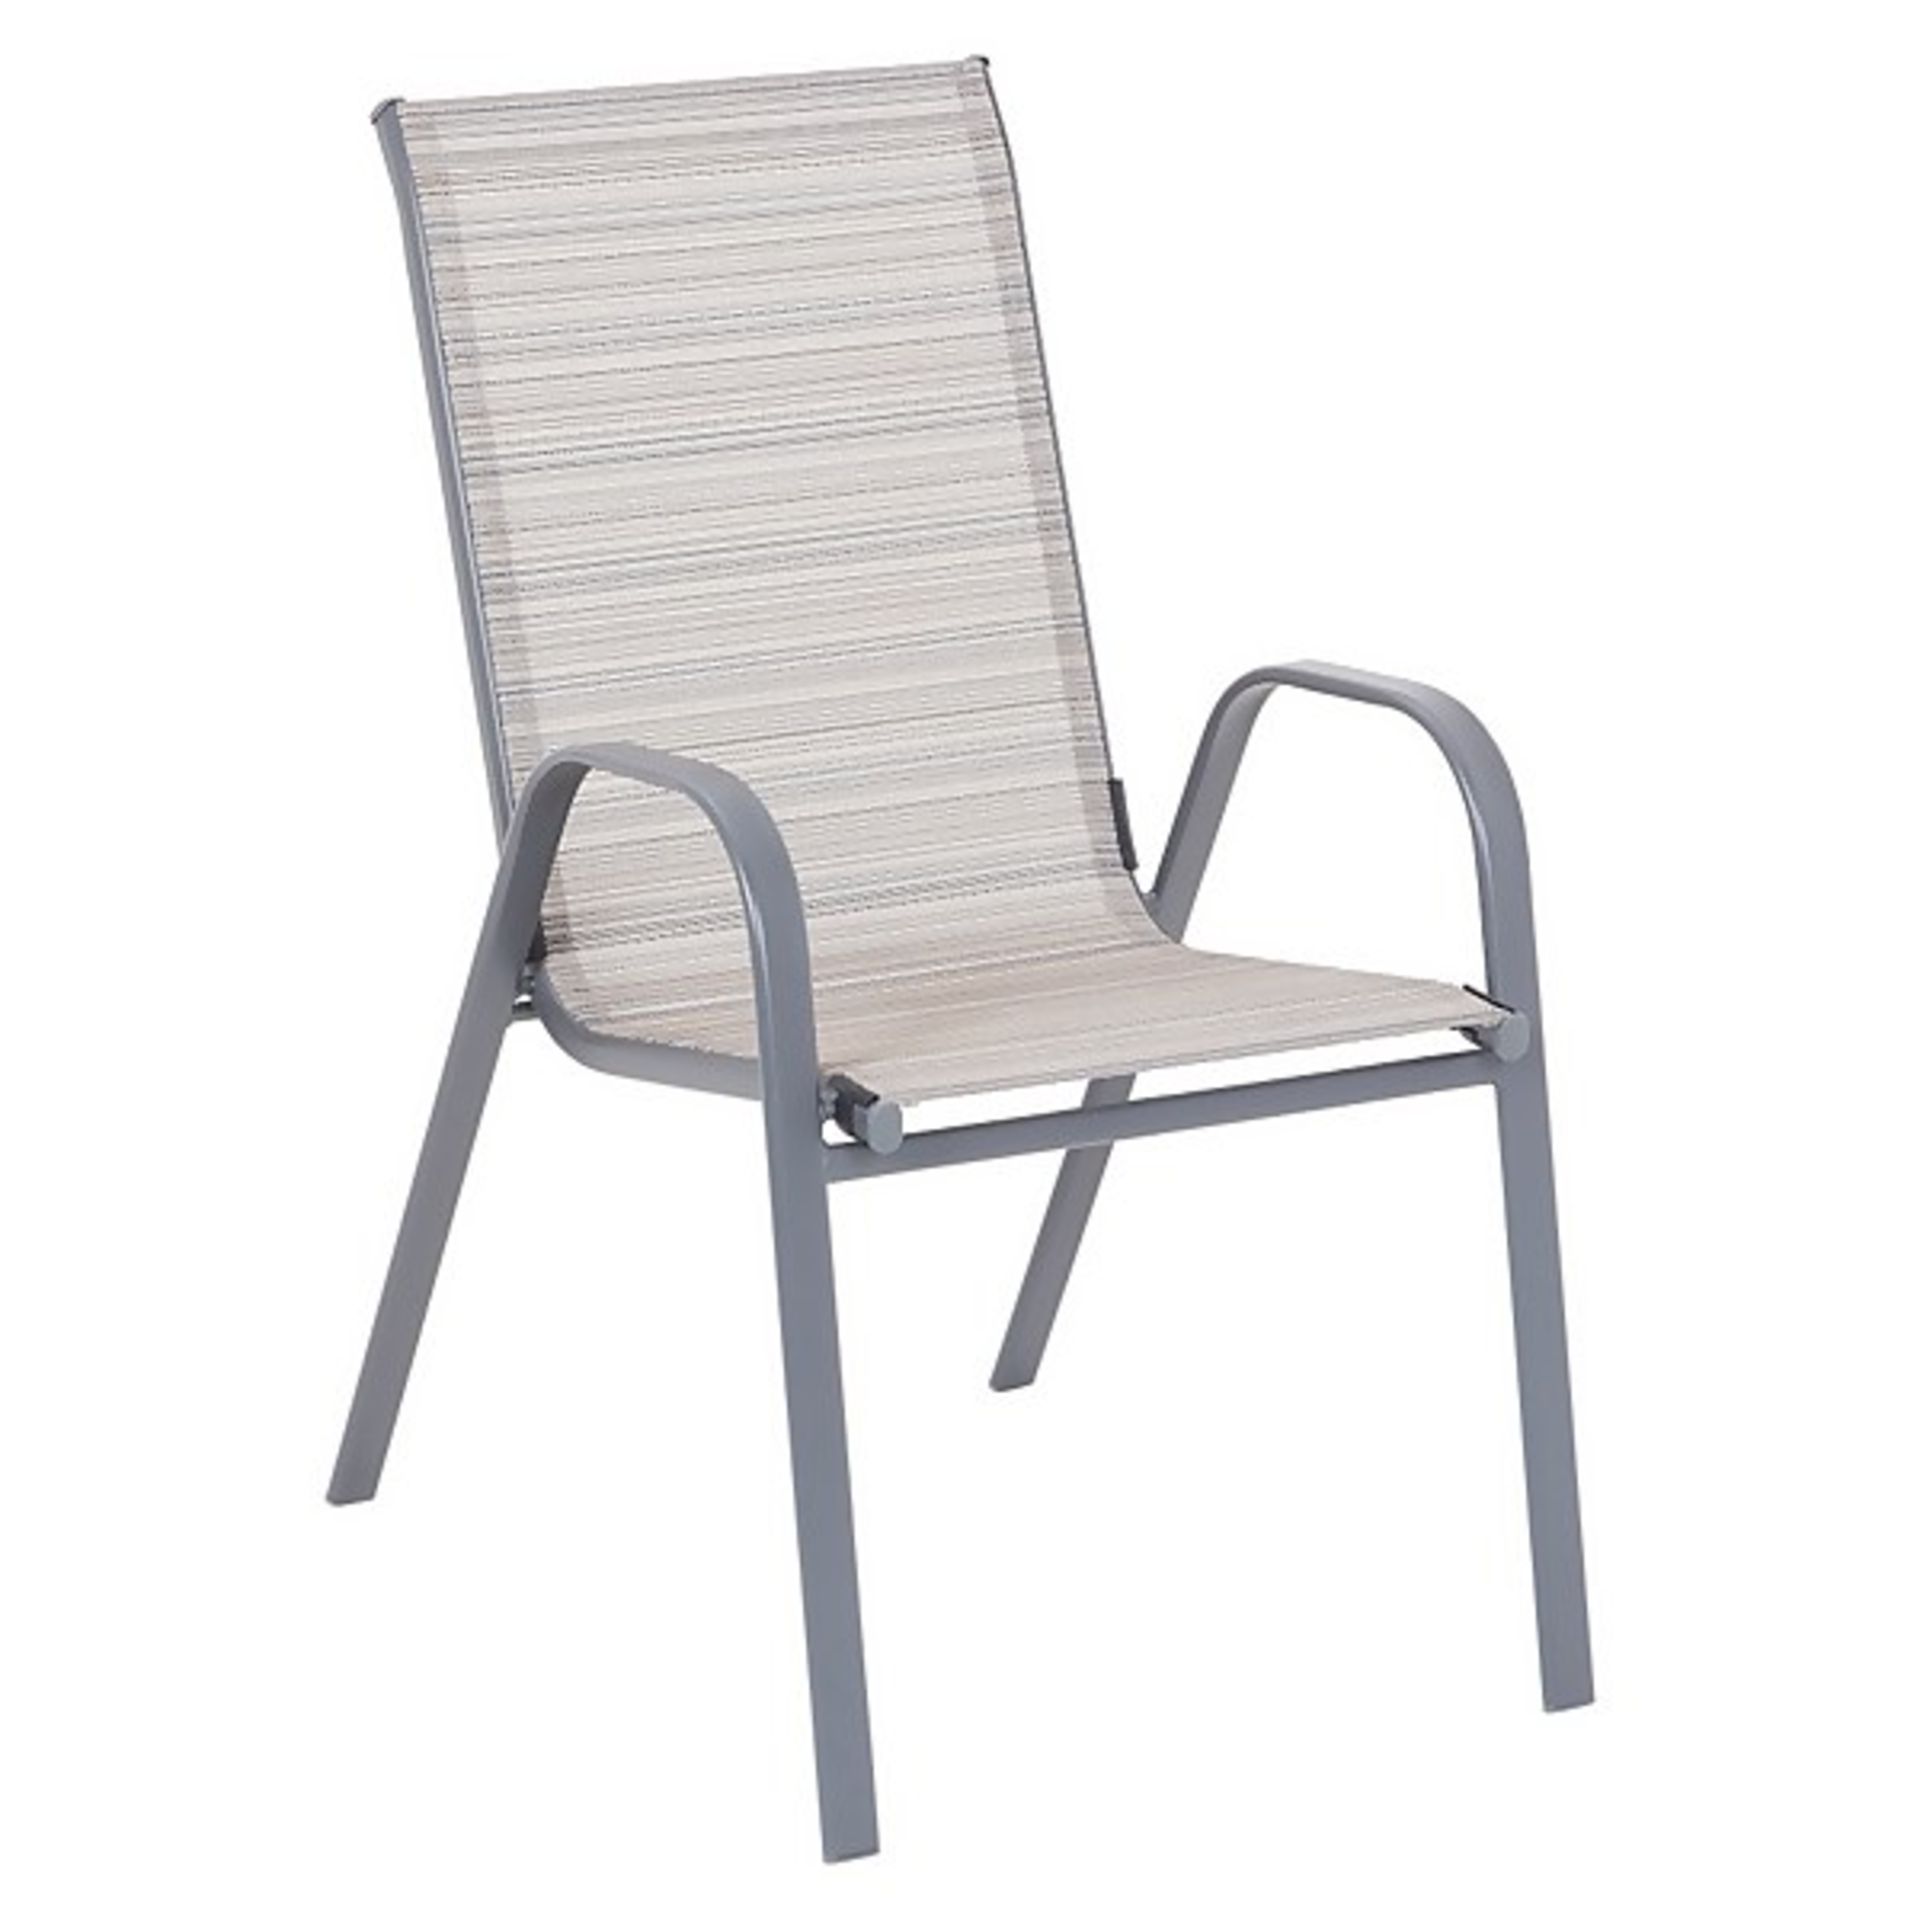 (R10F) 2x Andorra Stacking Chair. Powder Coated Steel Frame. (H92x W55x D73cm). Both Units Appear A